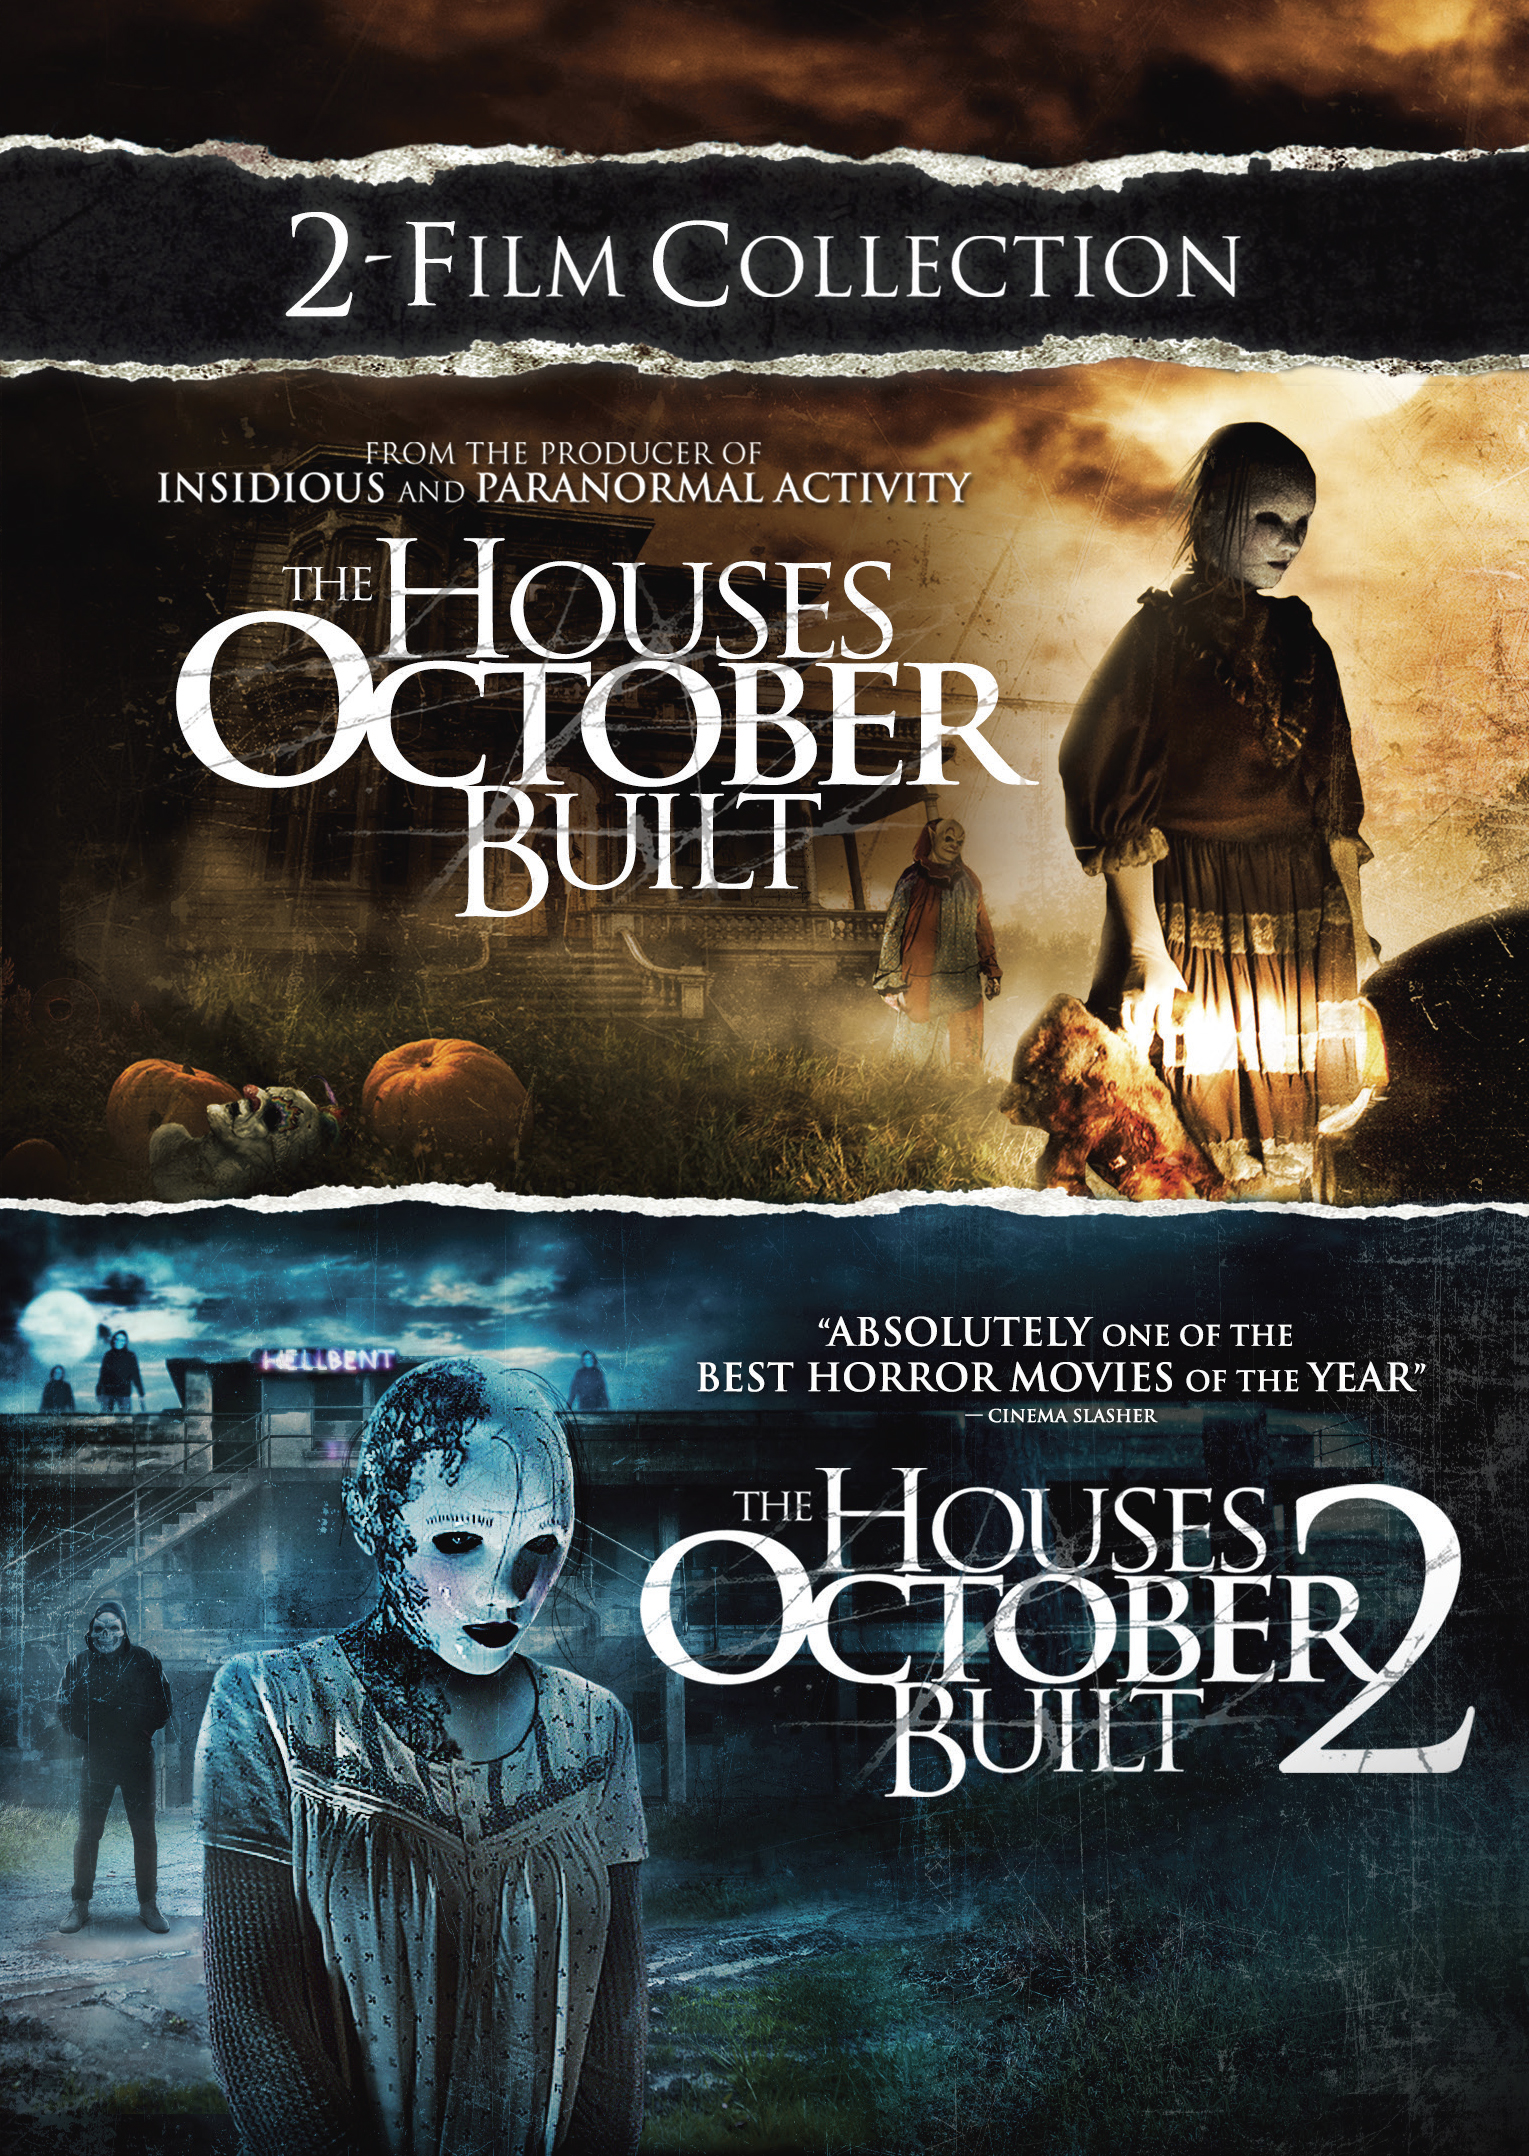 The Houses October Built (dvd)